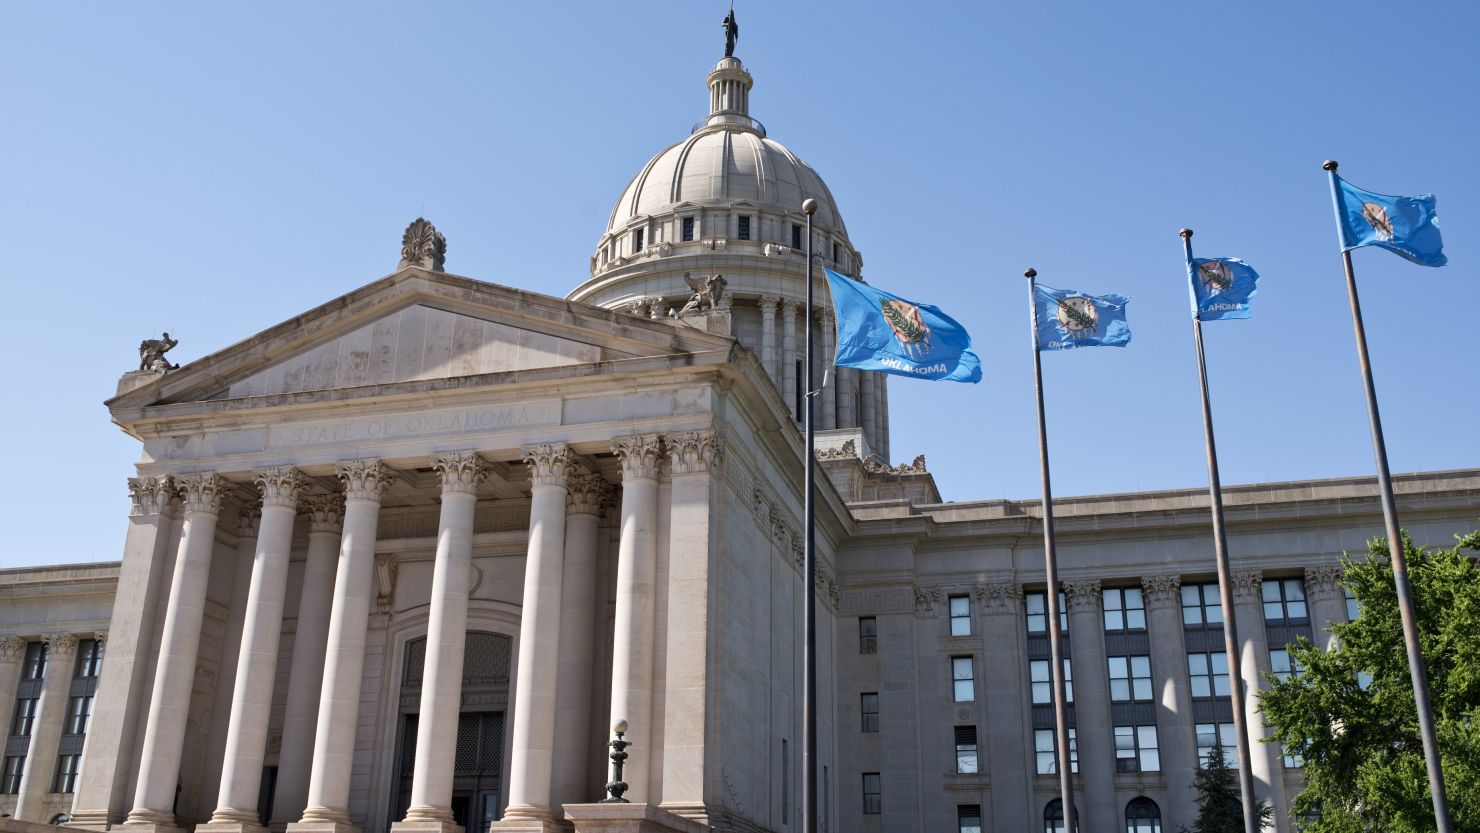 A visit to the Oklahoma state Capitol this week became a painful lesson for a group of LGBT students.